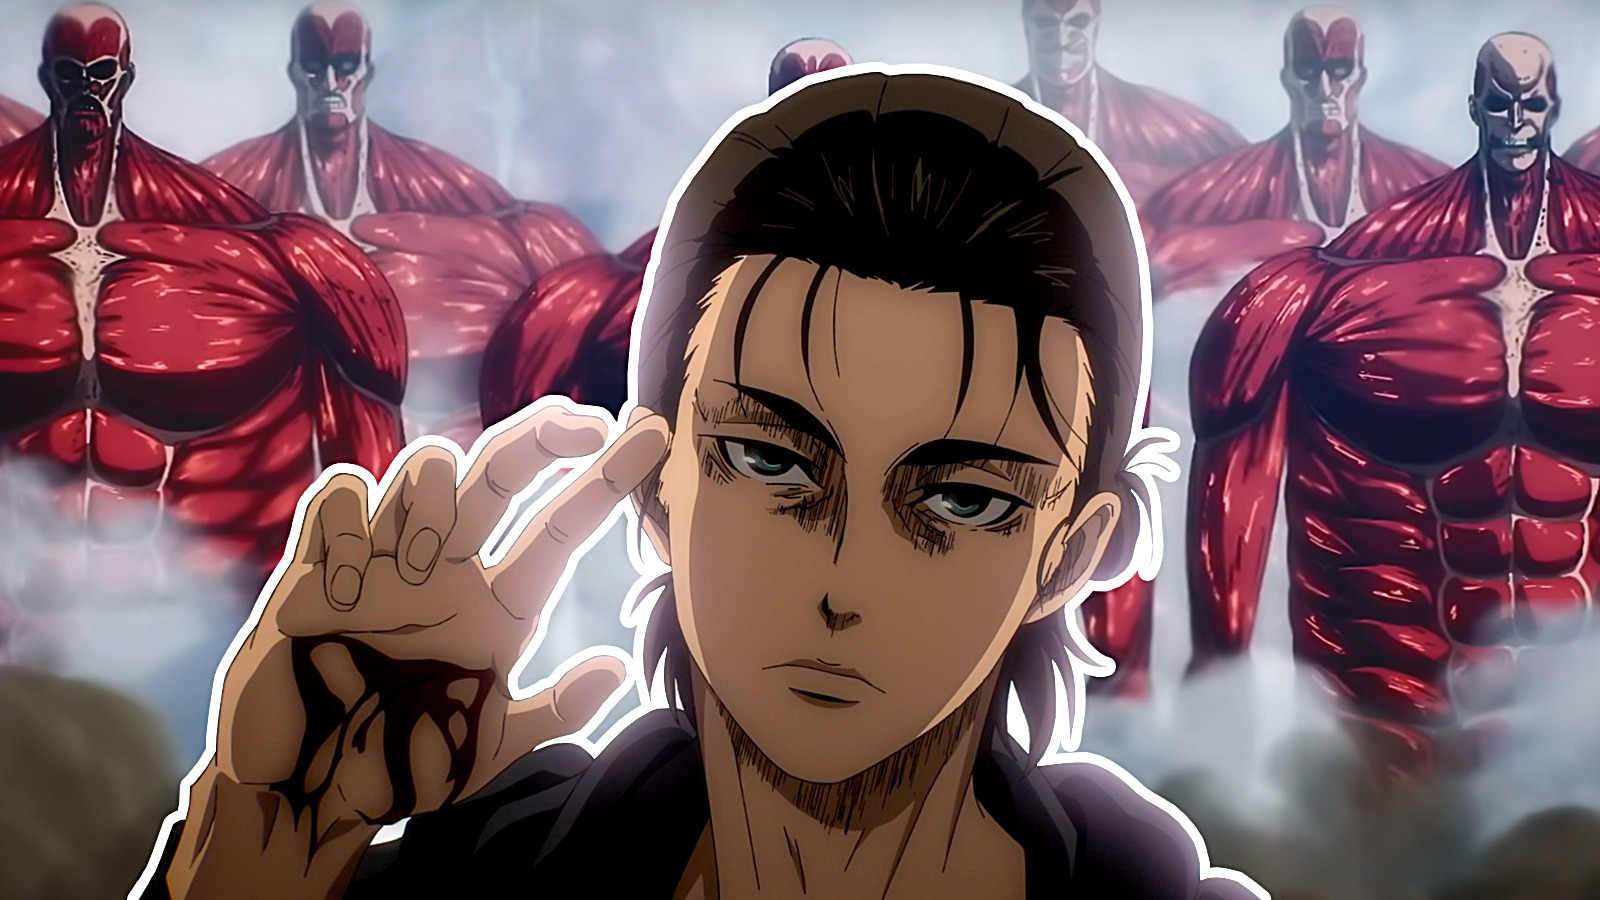 The Ending Of Attack On Titan Season 4 Part 3 Explained